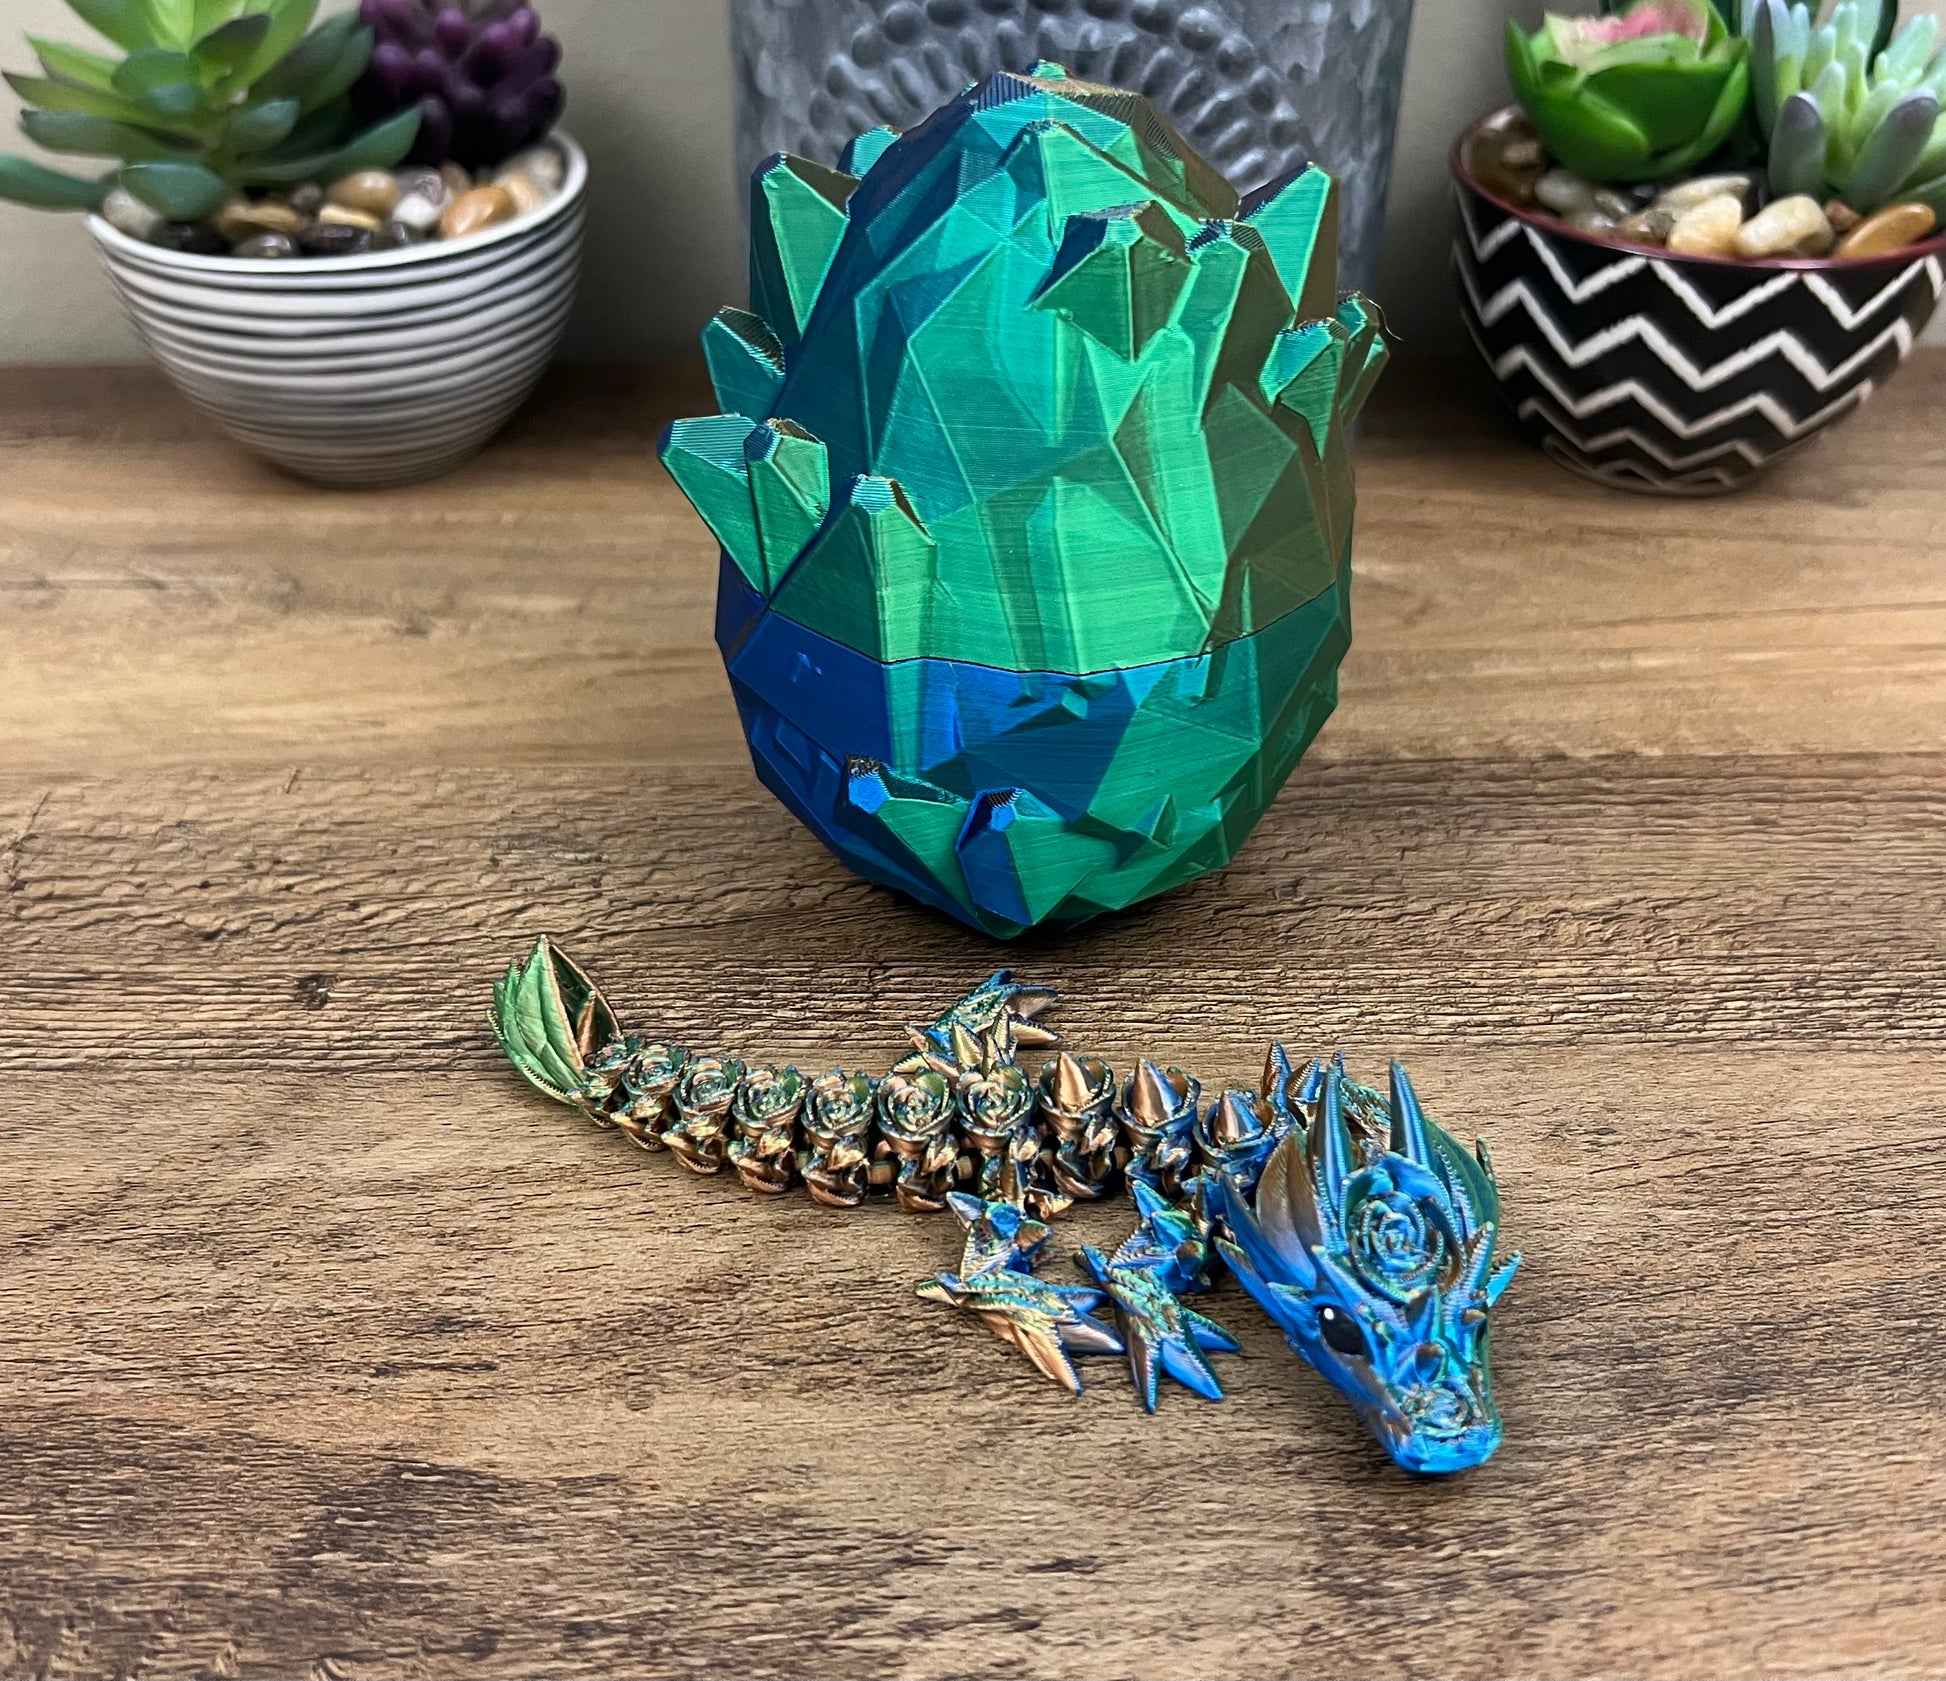  Baby Dragons , Articulated Baby Crystal Dragon, Rose